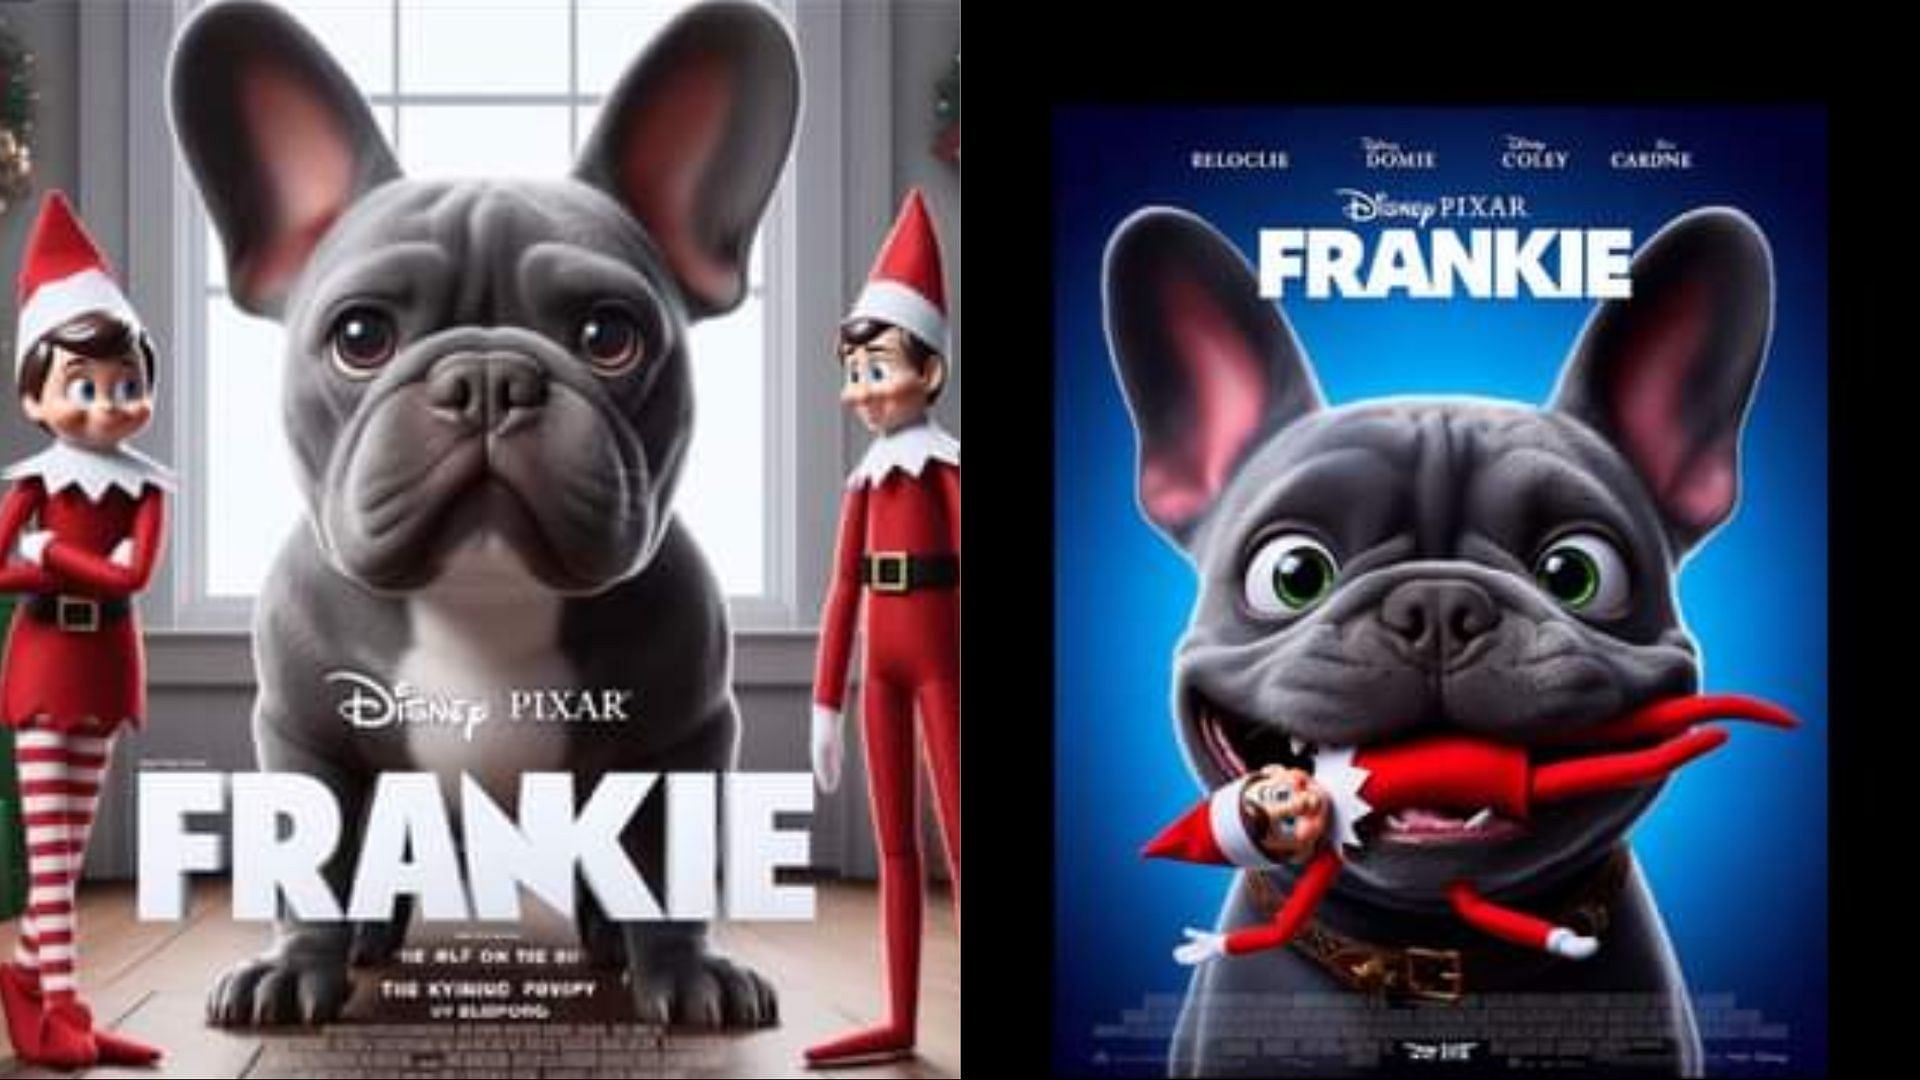 Claims of Disney and Pixar releasing a Frankie dog movie debunked (Images via Facebook)